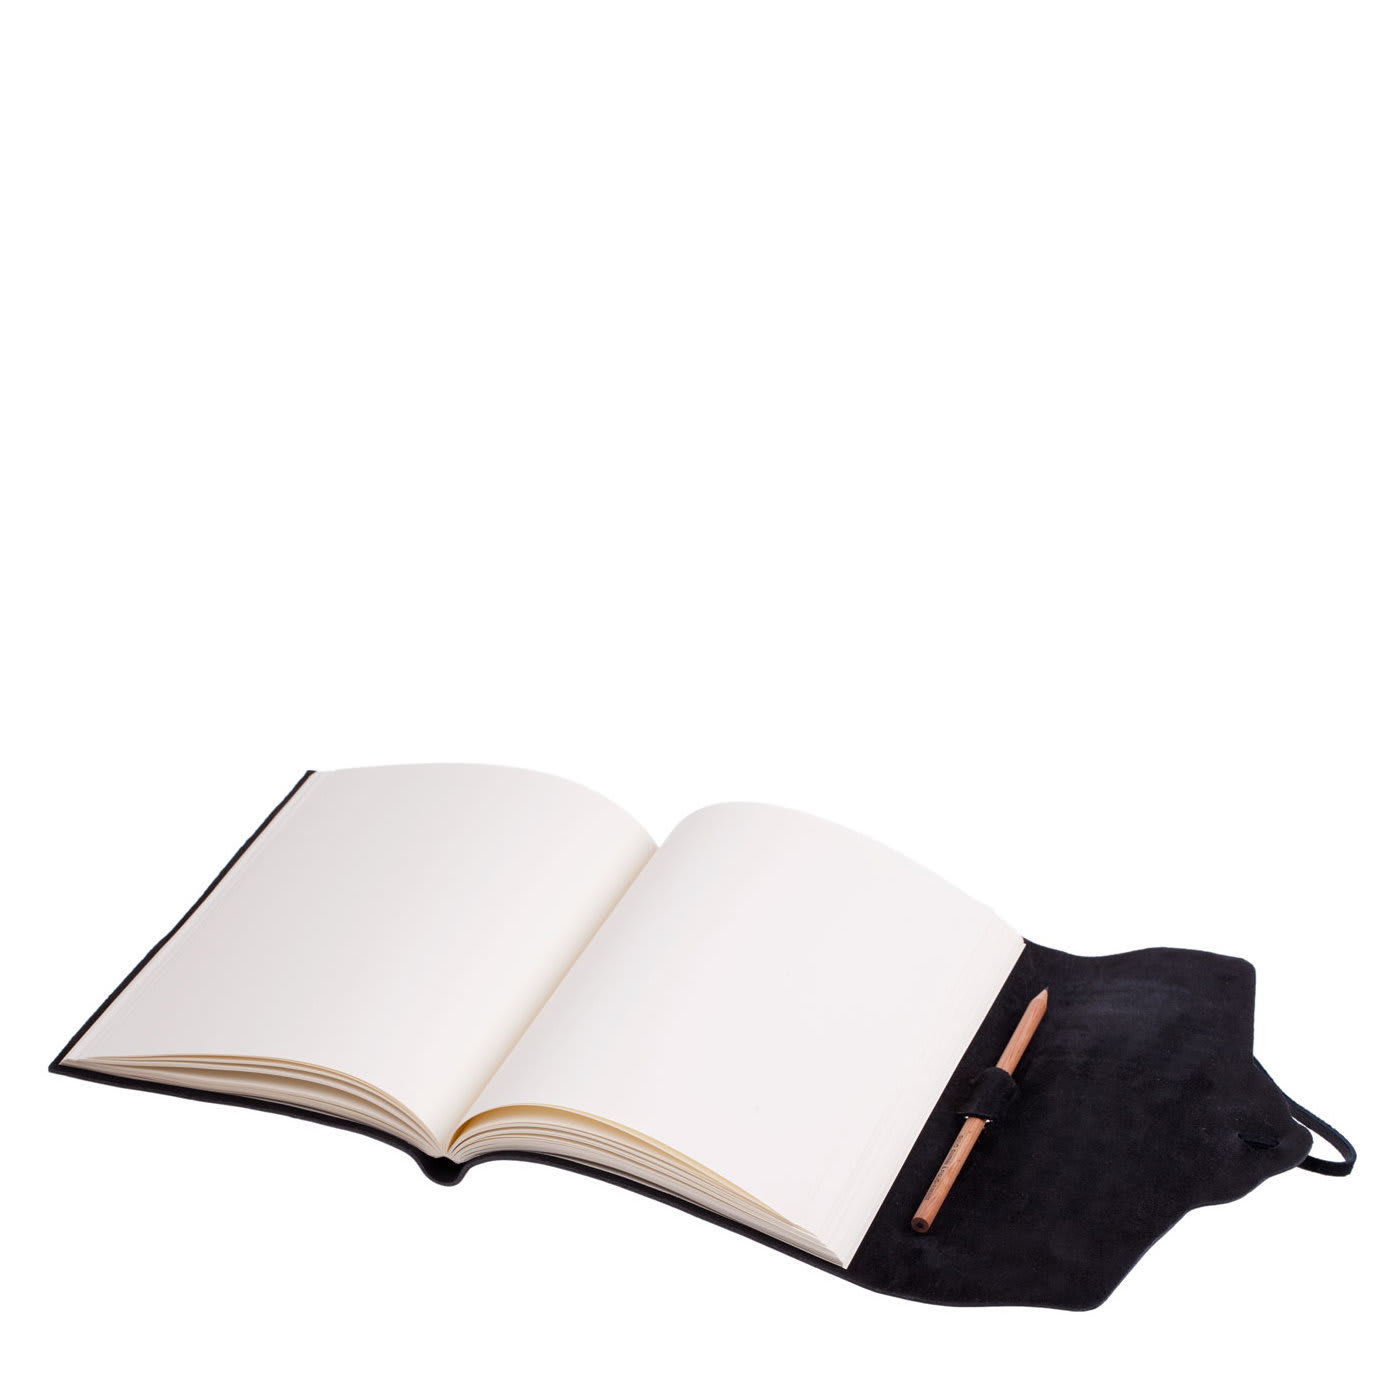 Lace Black Leather Notebook - Giannini